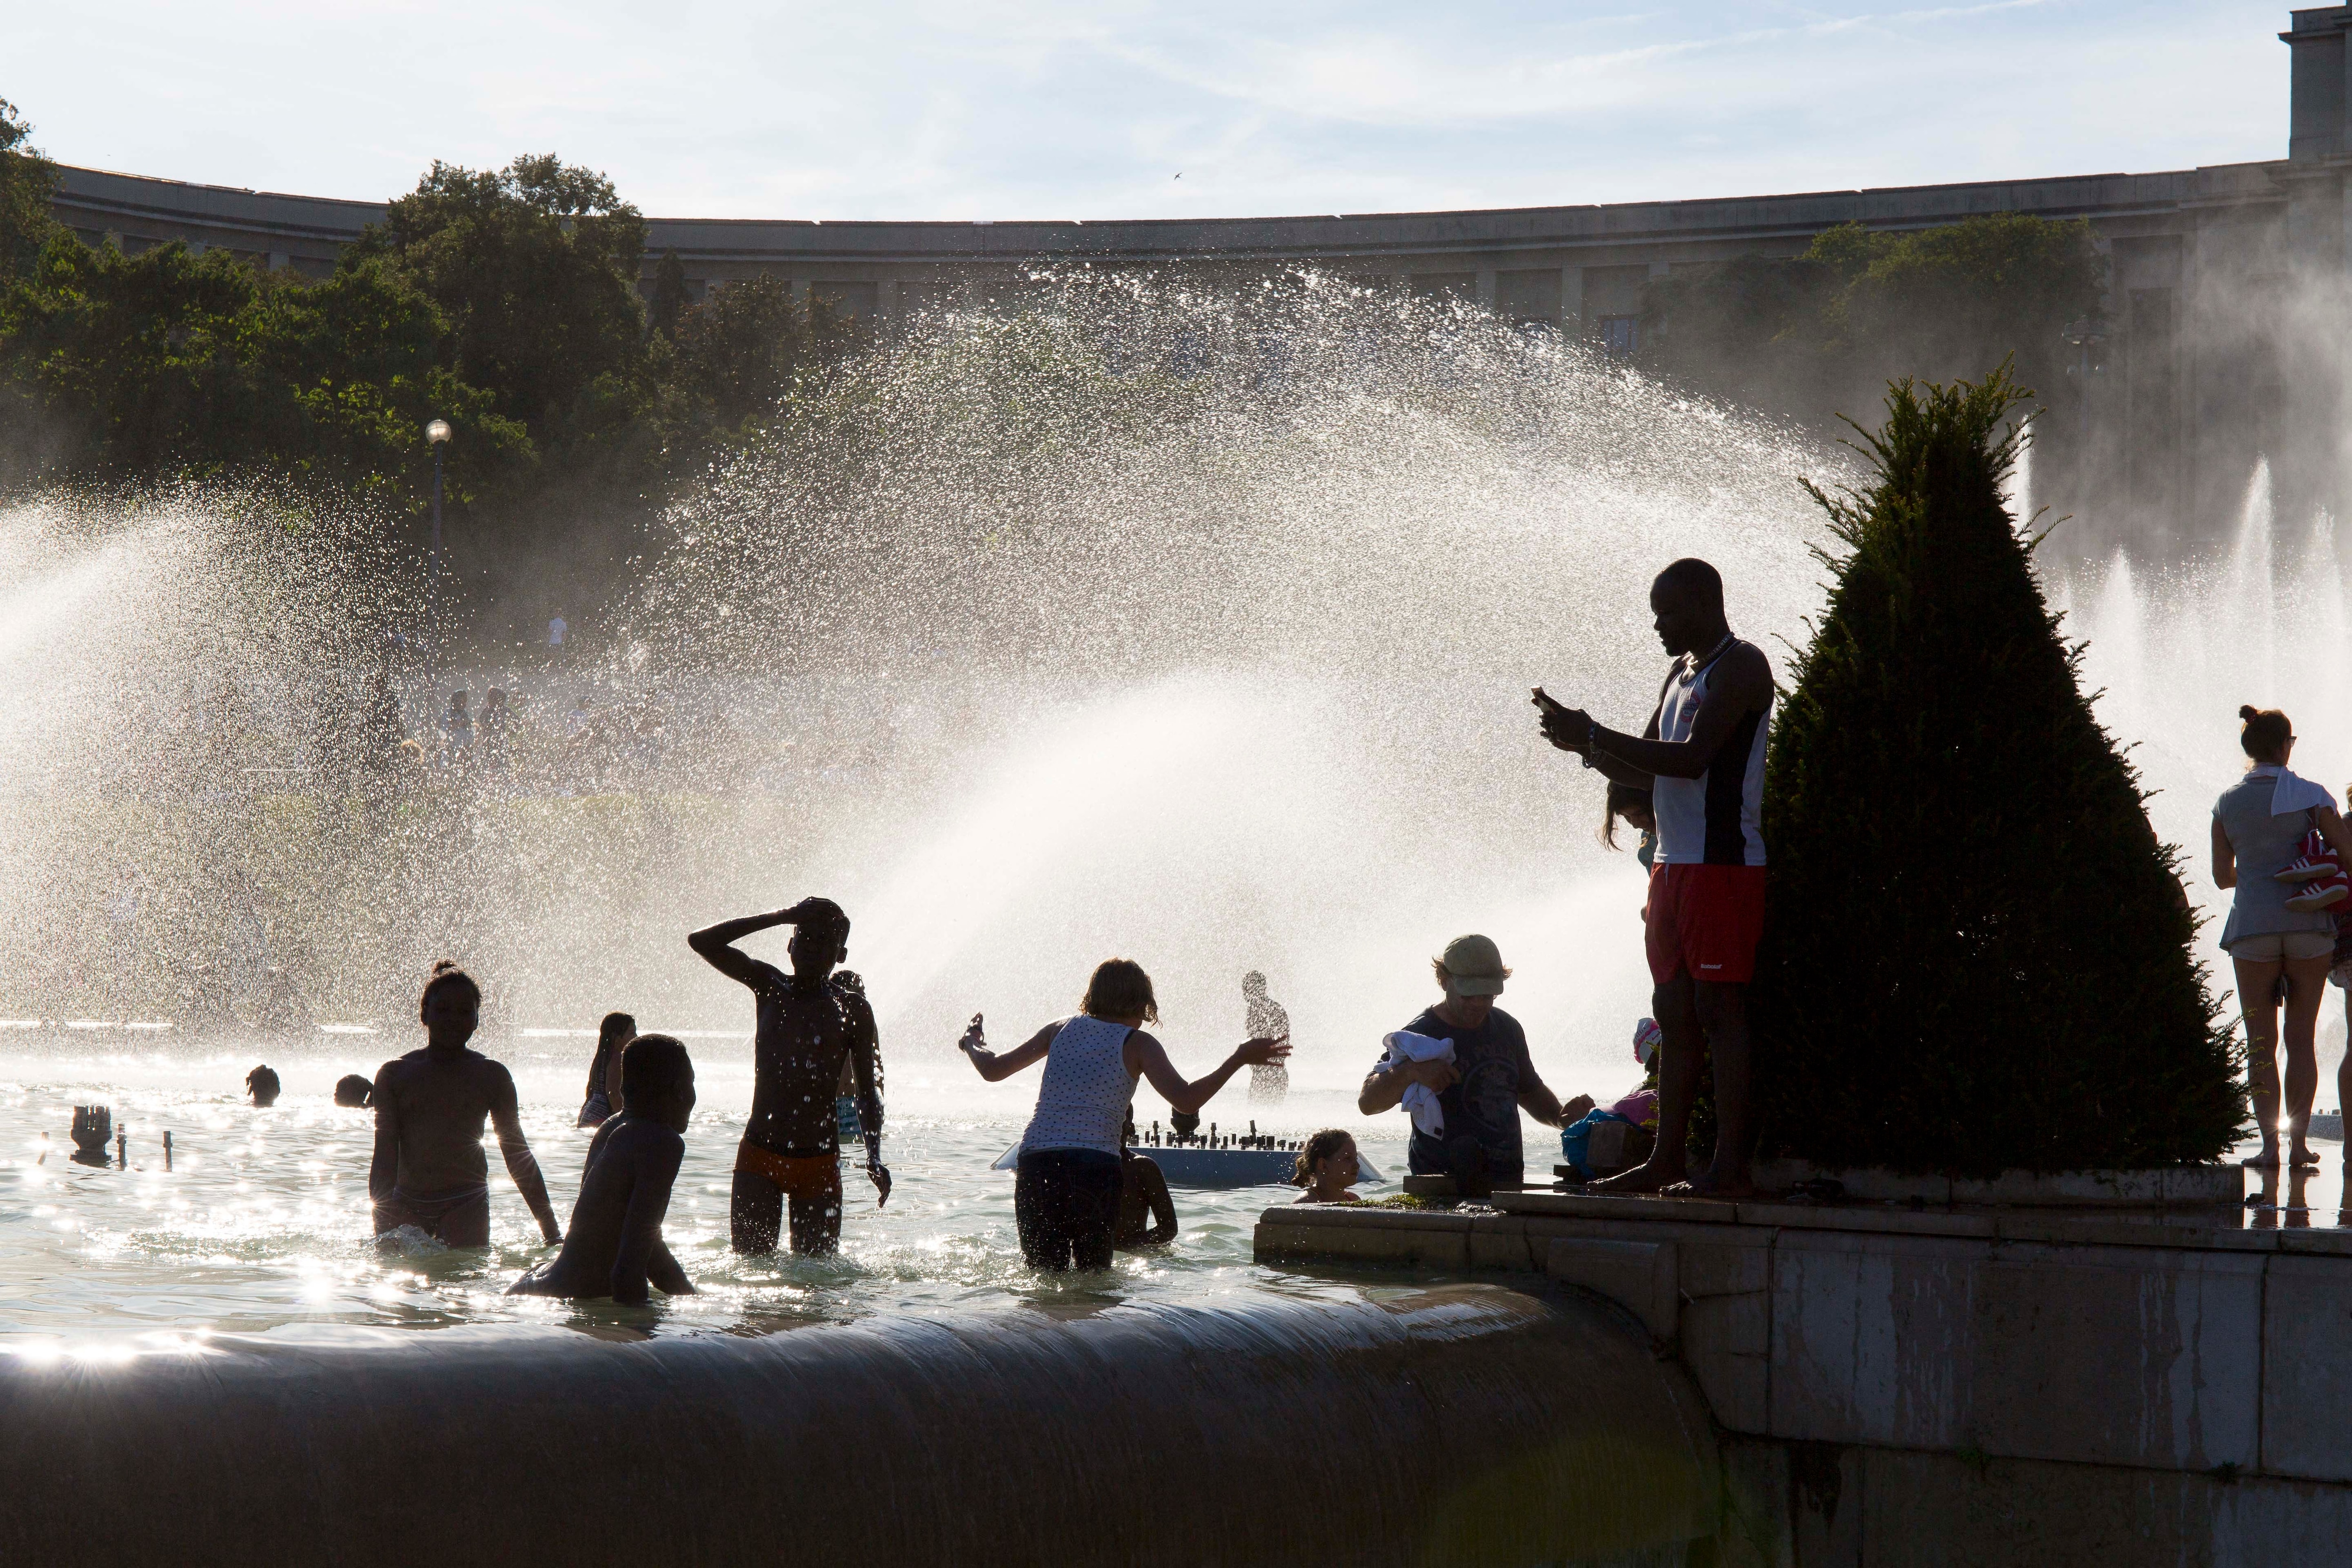 People cool off in ponds at the Trocadero in Paris, France, June 23, 2019.